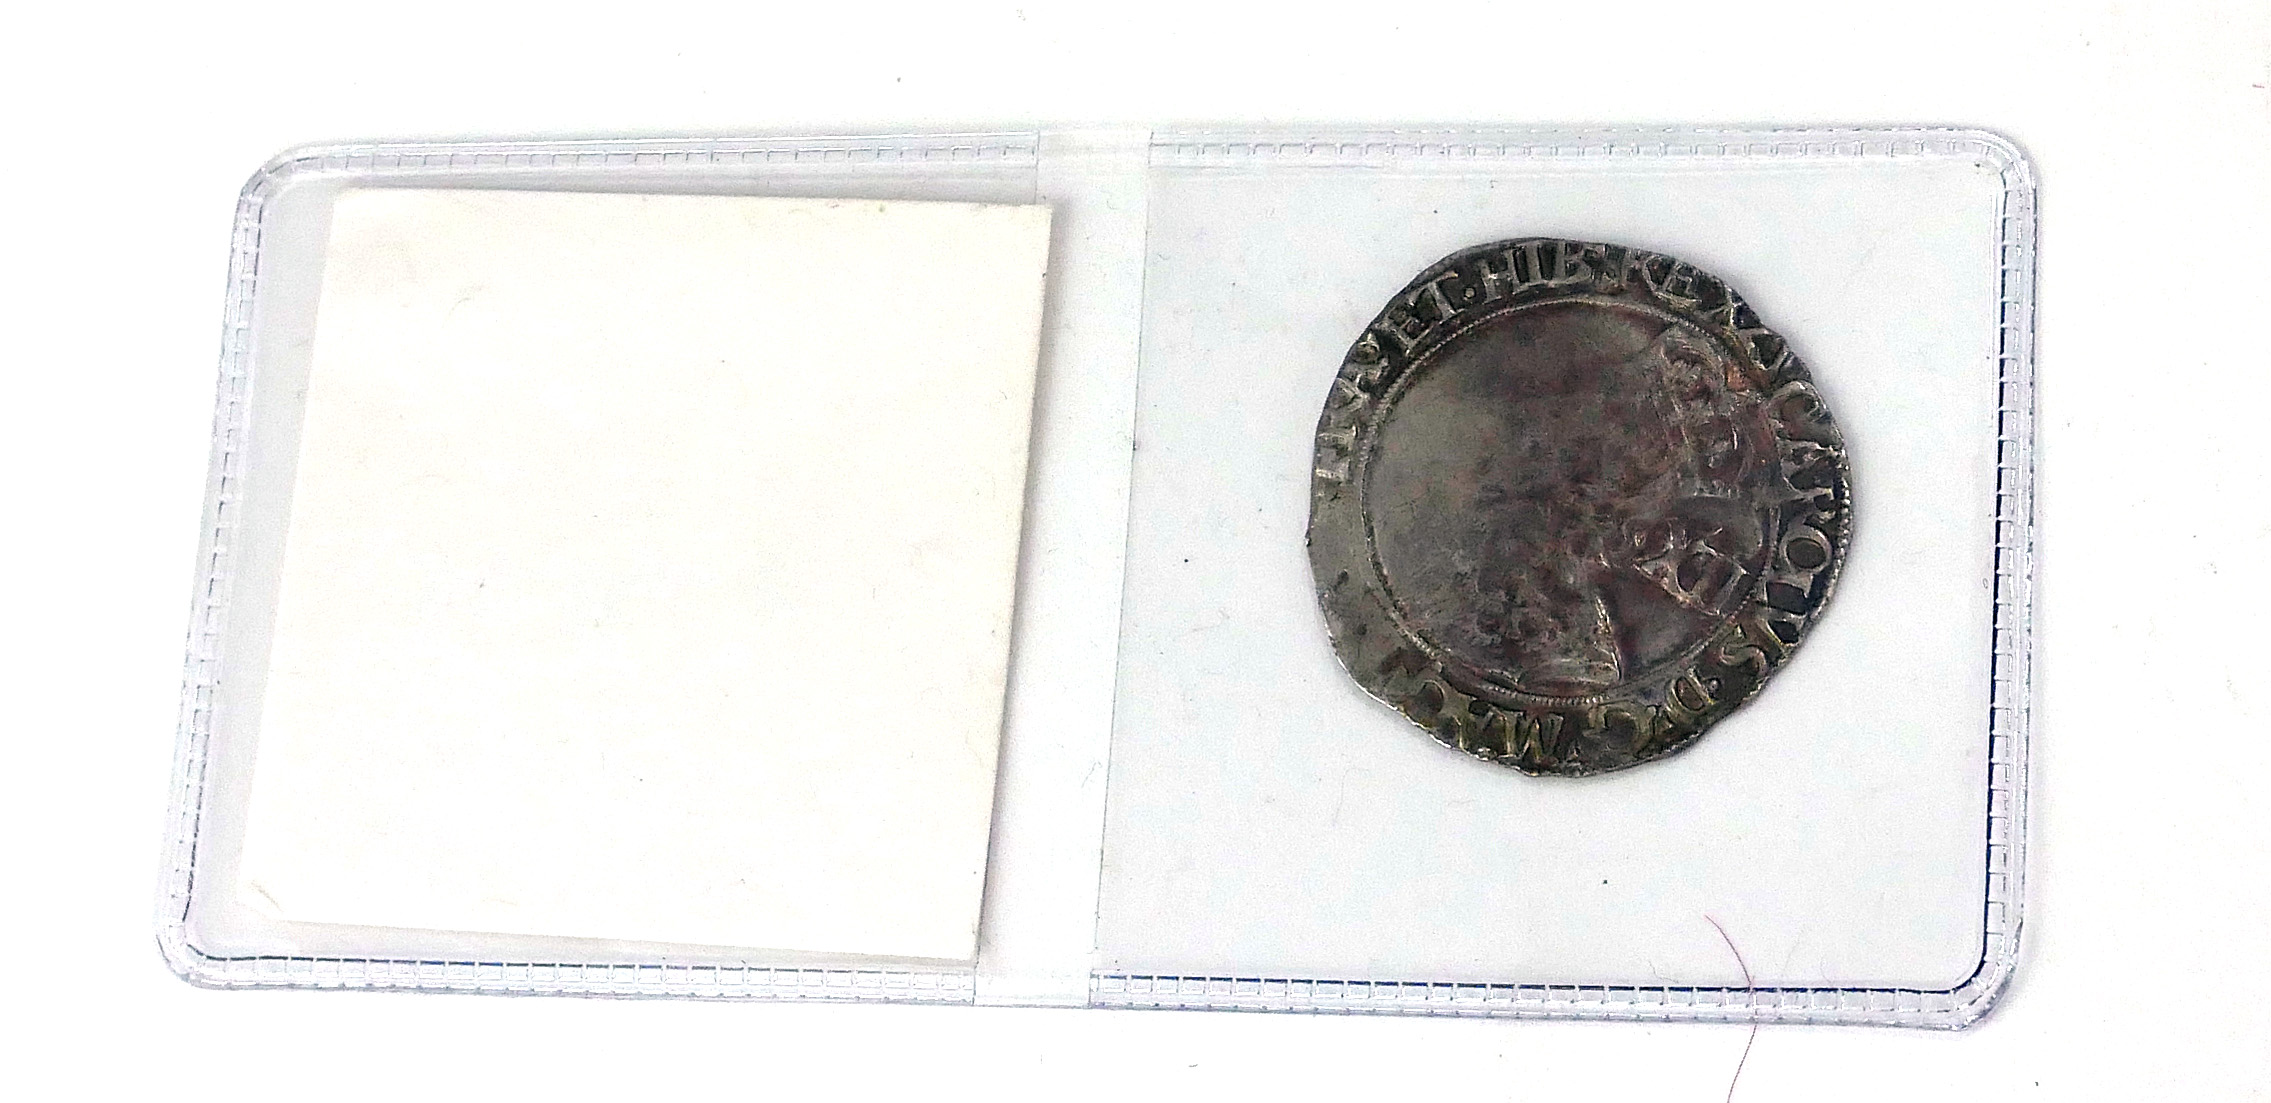 A KING CHARLES I, 1625 - 1649, SILVER SHILLING COIN Having a hammered edge, Tower Mint under the - Image 2 of 2